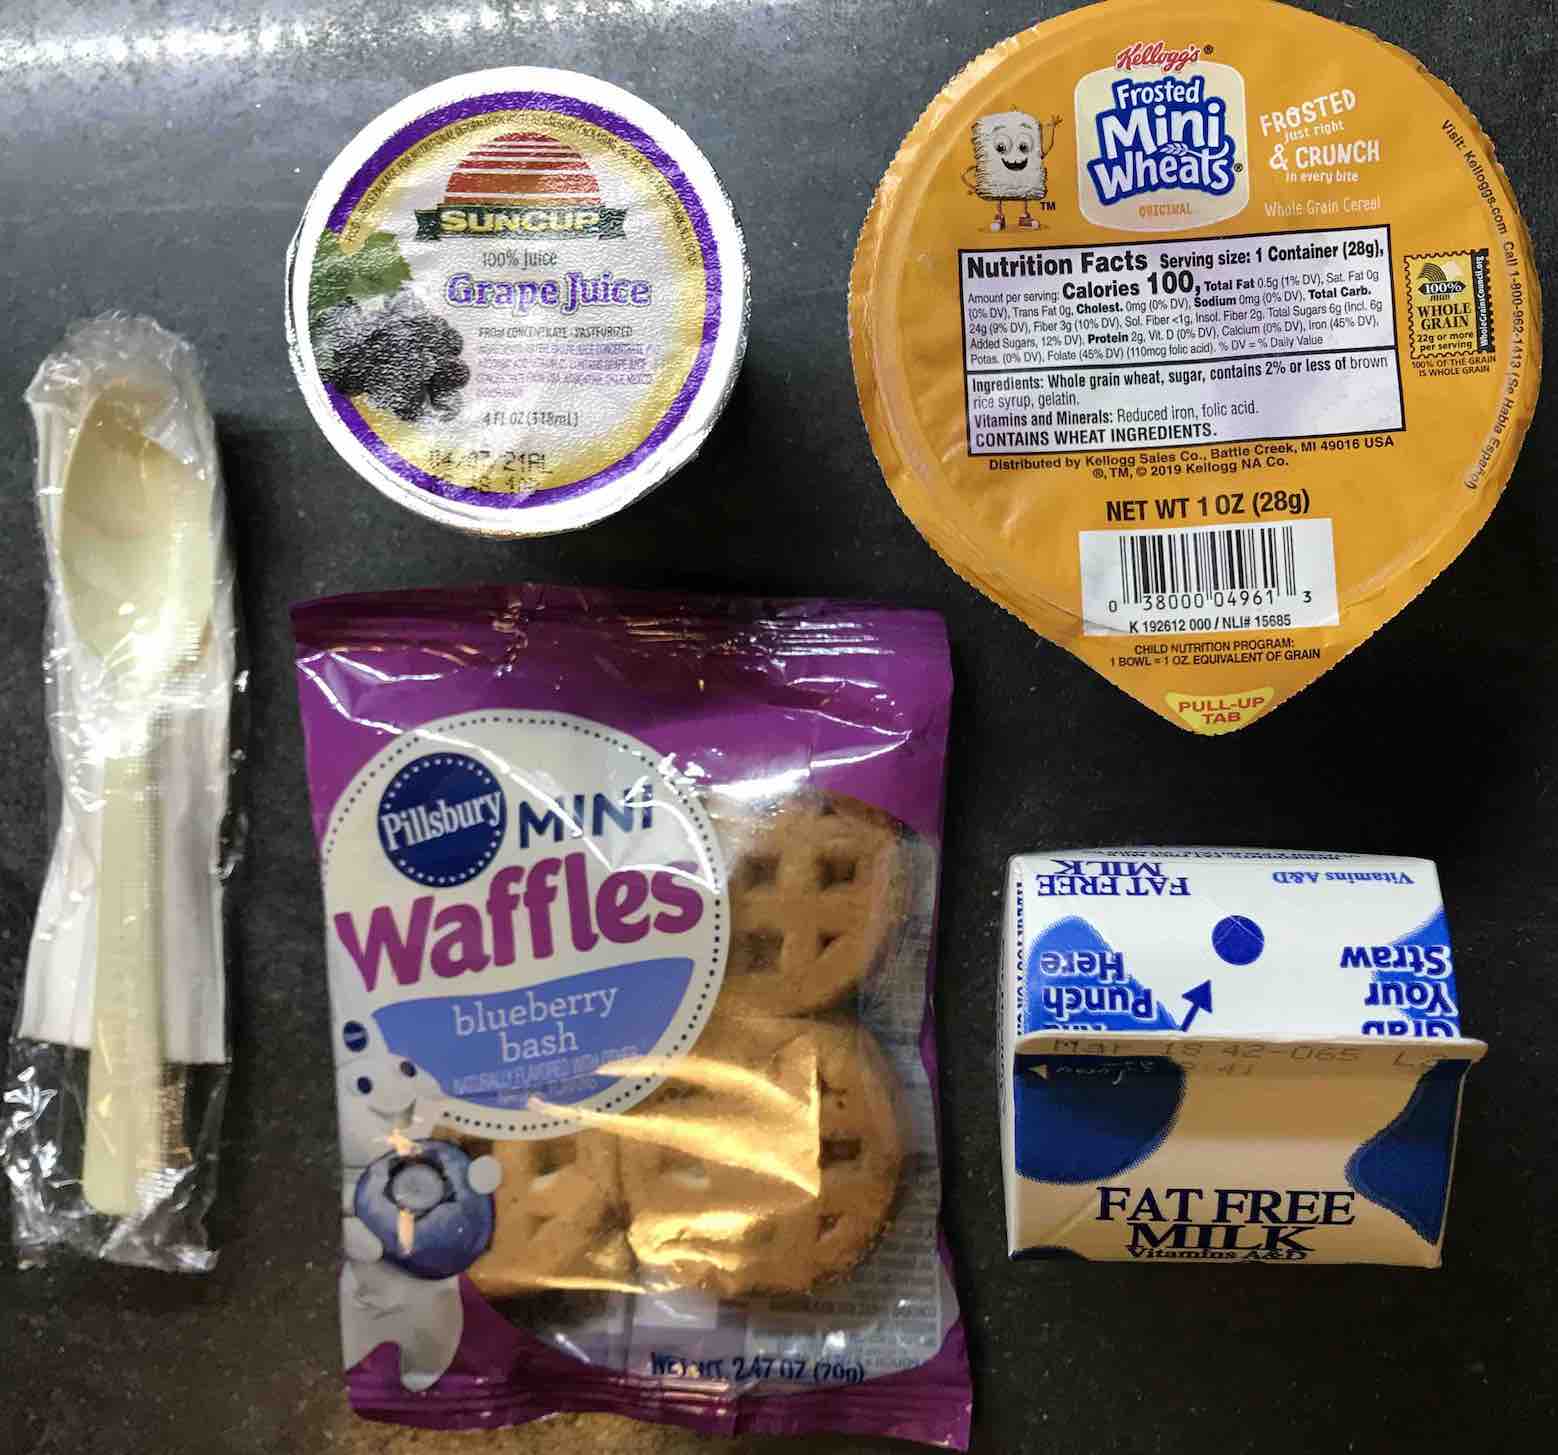 pouch of Mini-Waffles, cup of Mini-Wheats, cup of grape juice, carton of fat-free milk, and sleeve containing a spoon and a napkin